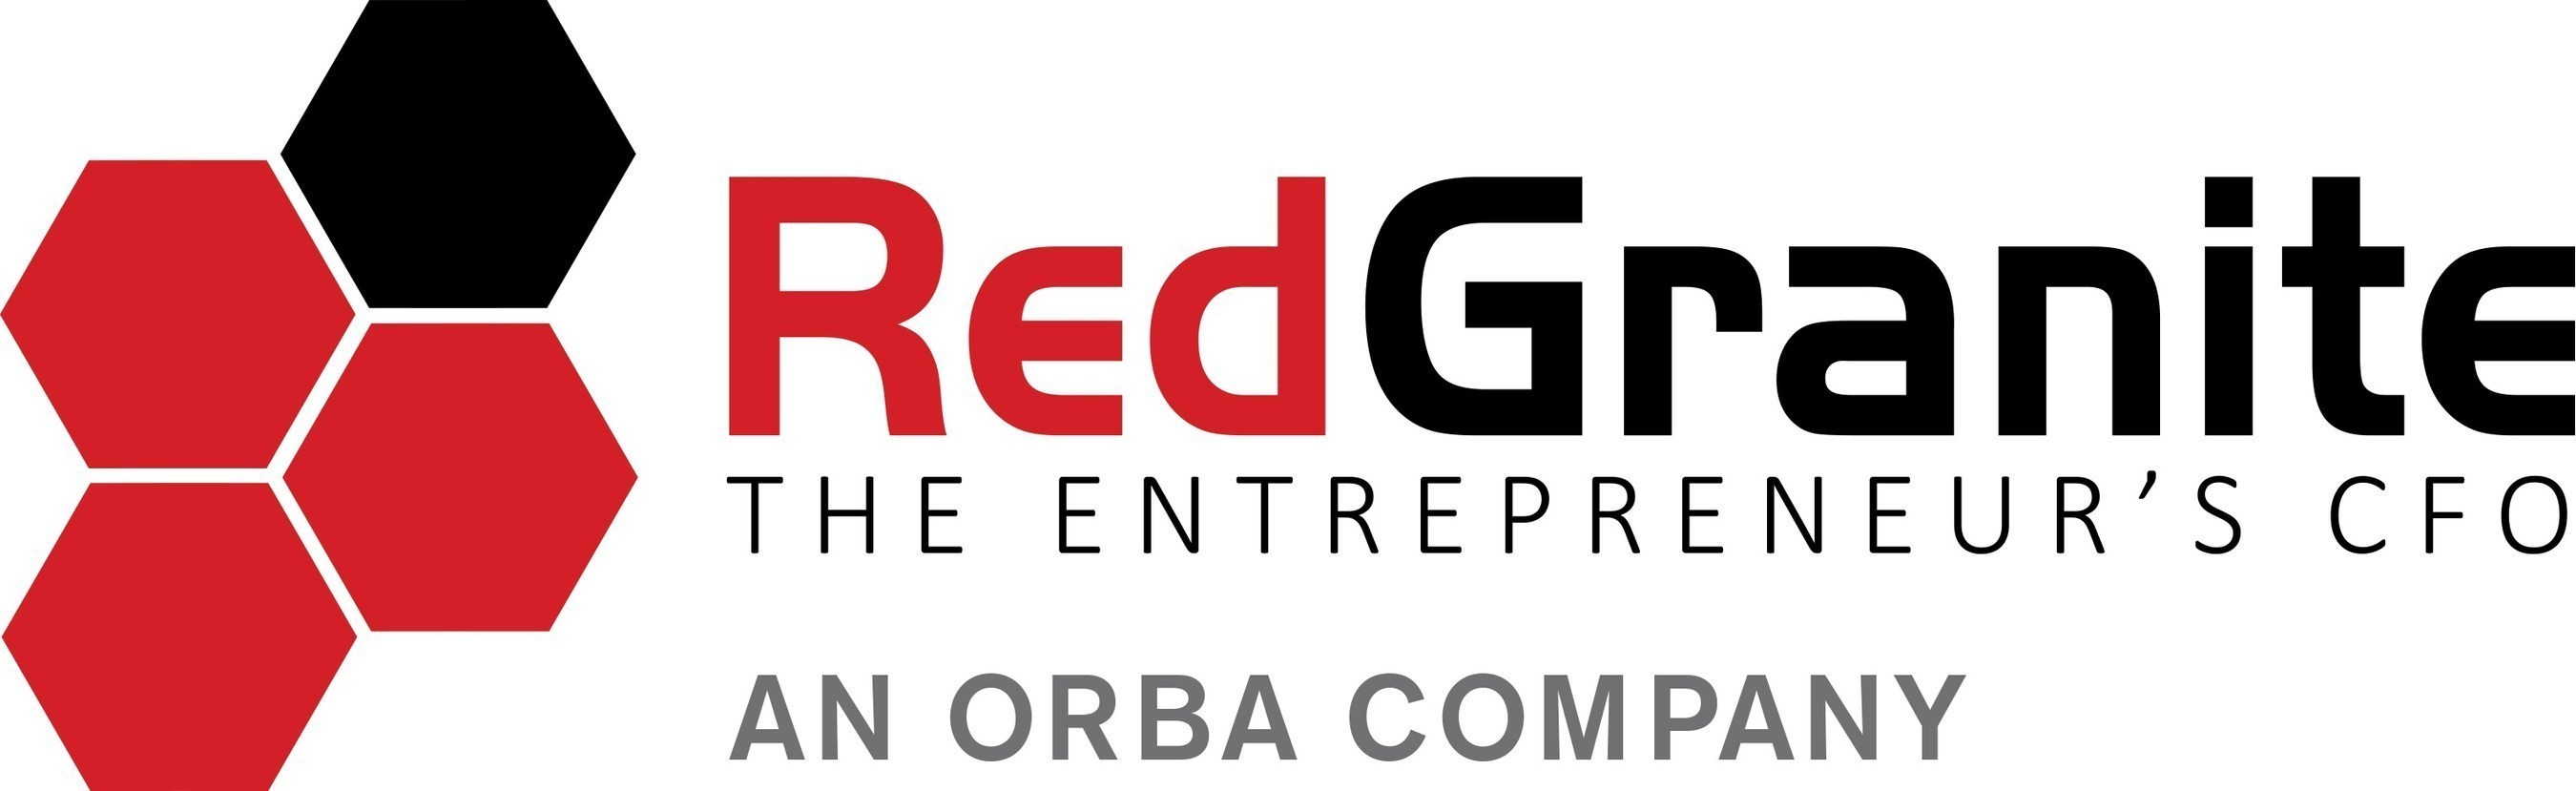 Ostrow Reisin Berk & Abrams, Ltd. (ORBA), is pleased to announce that it is joining forces with Chicago-based Red Granite, an accounting, bookkeeping and financial services firm specializing in providing outsourced CFO support.